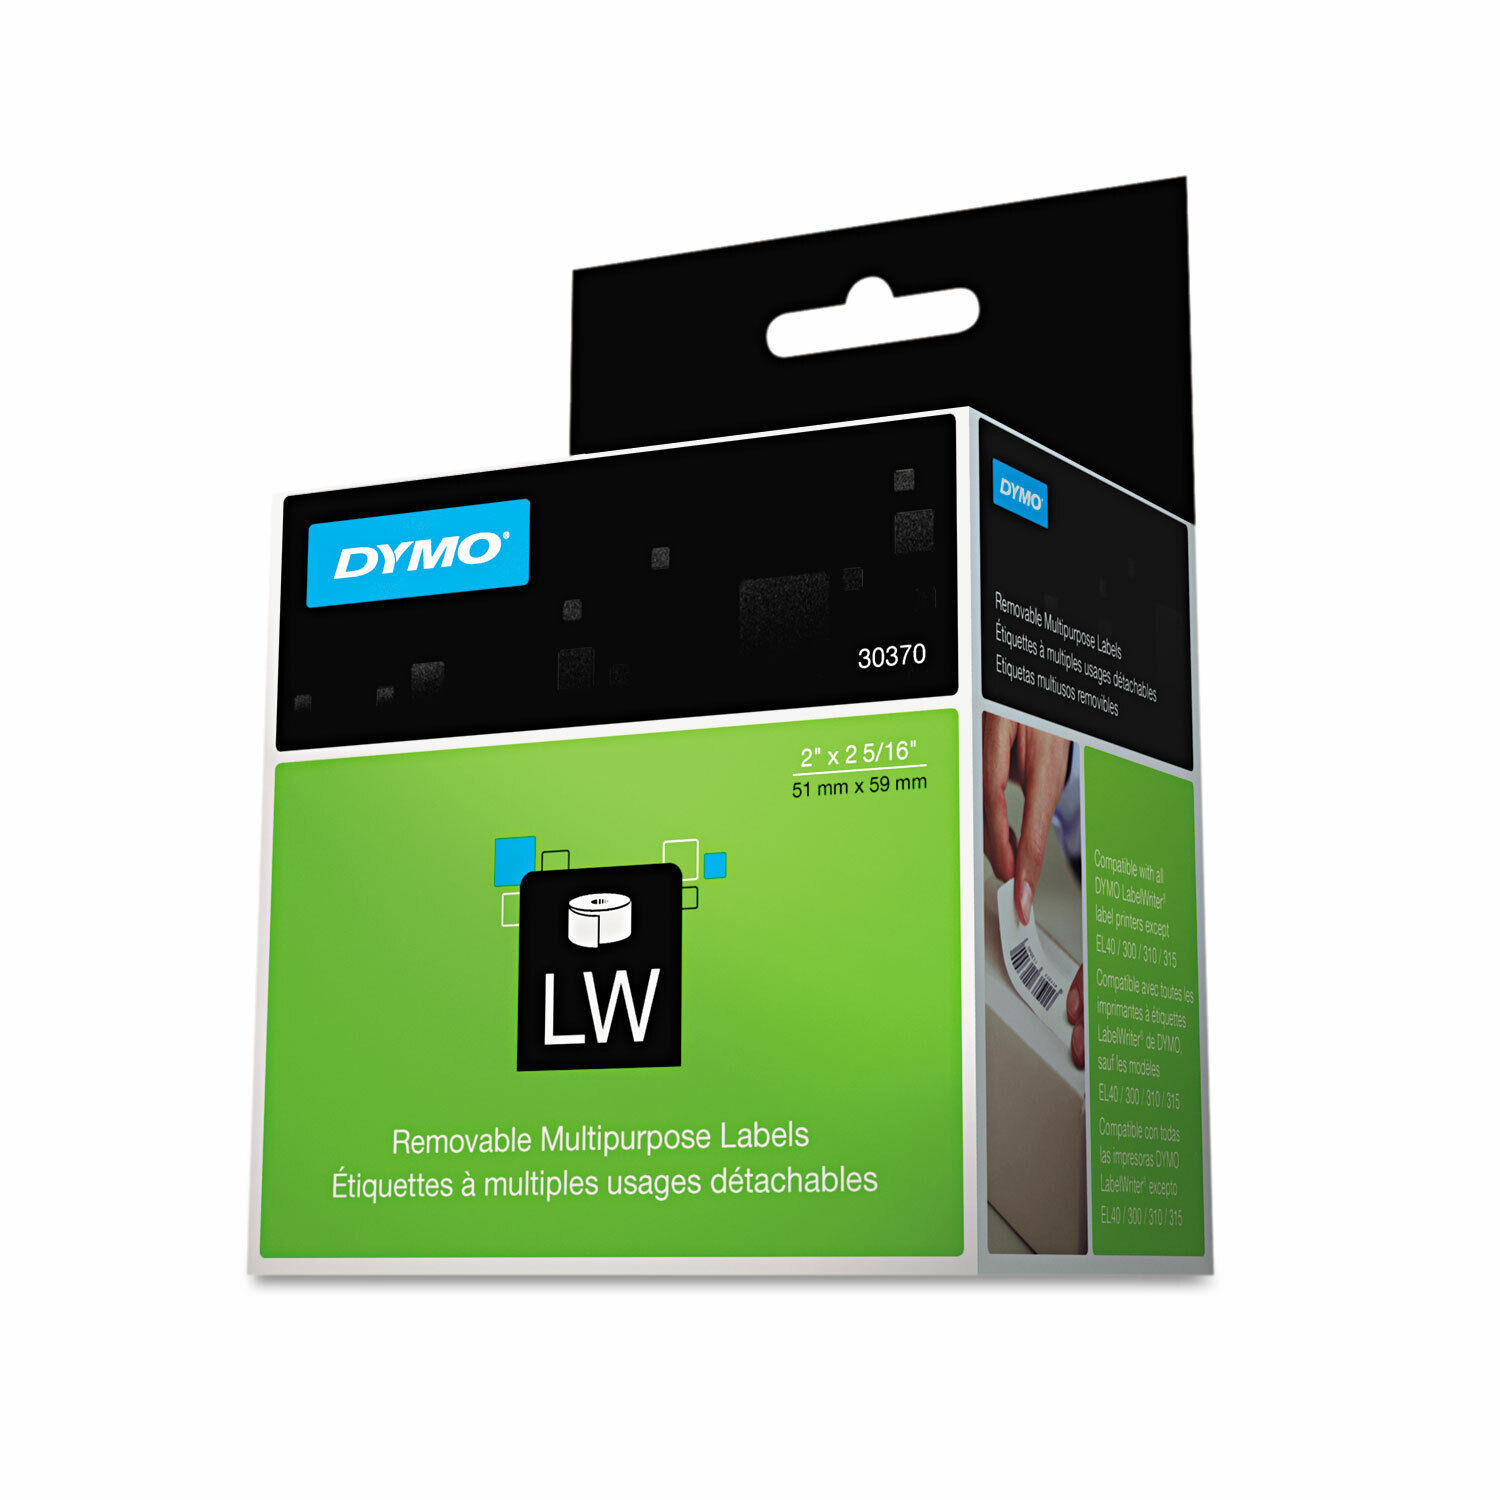 Primary image for DYMO LabelWriter Multipurpose Labels 2 x 2 5/16 White 250 Labels/Roll 30370